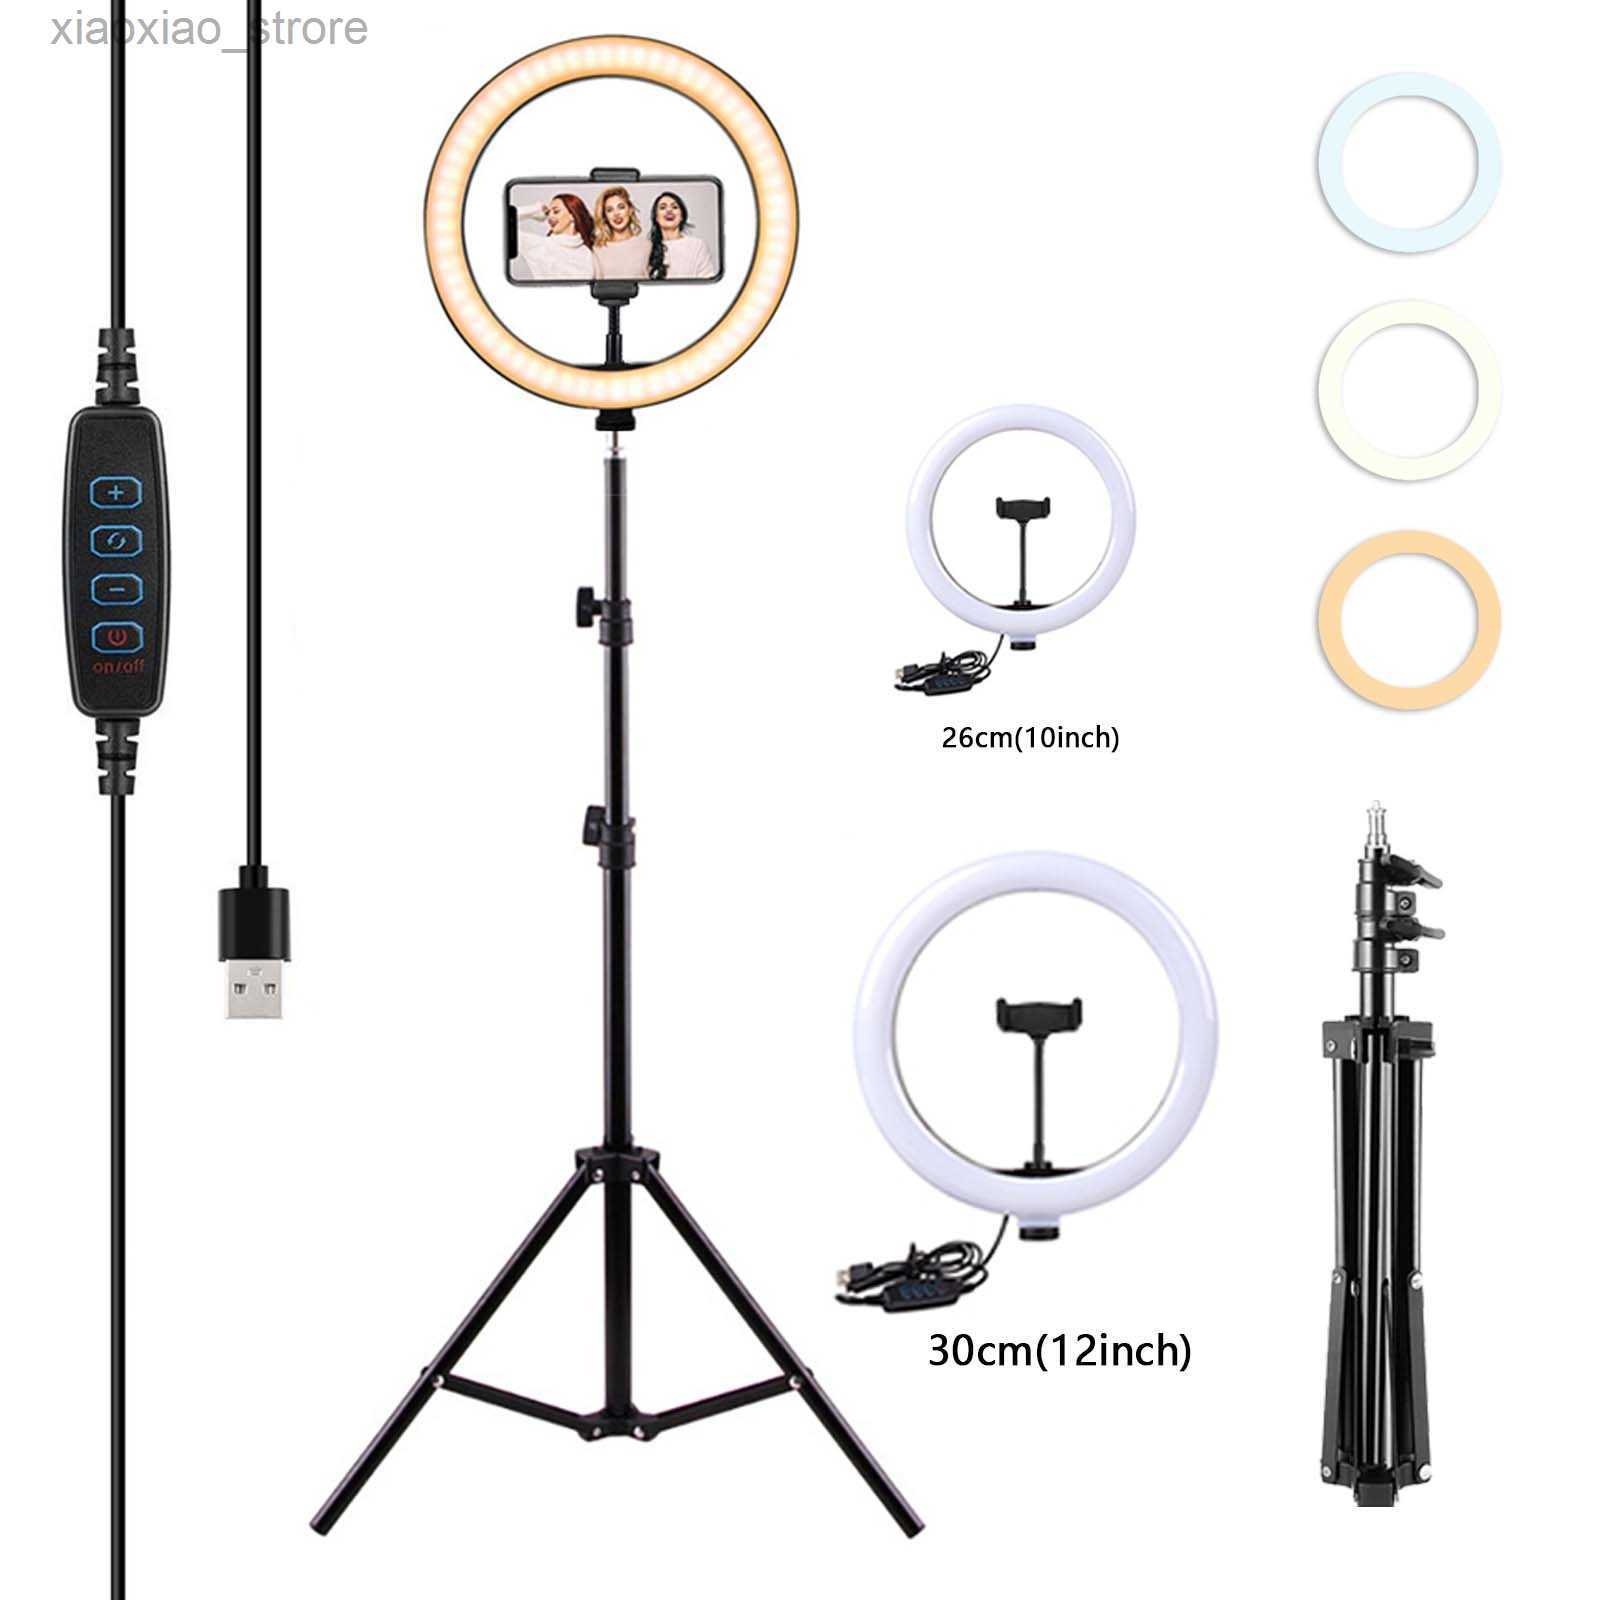 

Selfie Lights 12"/10" LED Selfie Ring Light Circle Fill Light Dimmable Round Lamp Makeup Photography RingLight with Phone Holder Tripod Stand